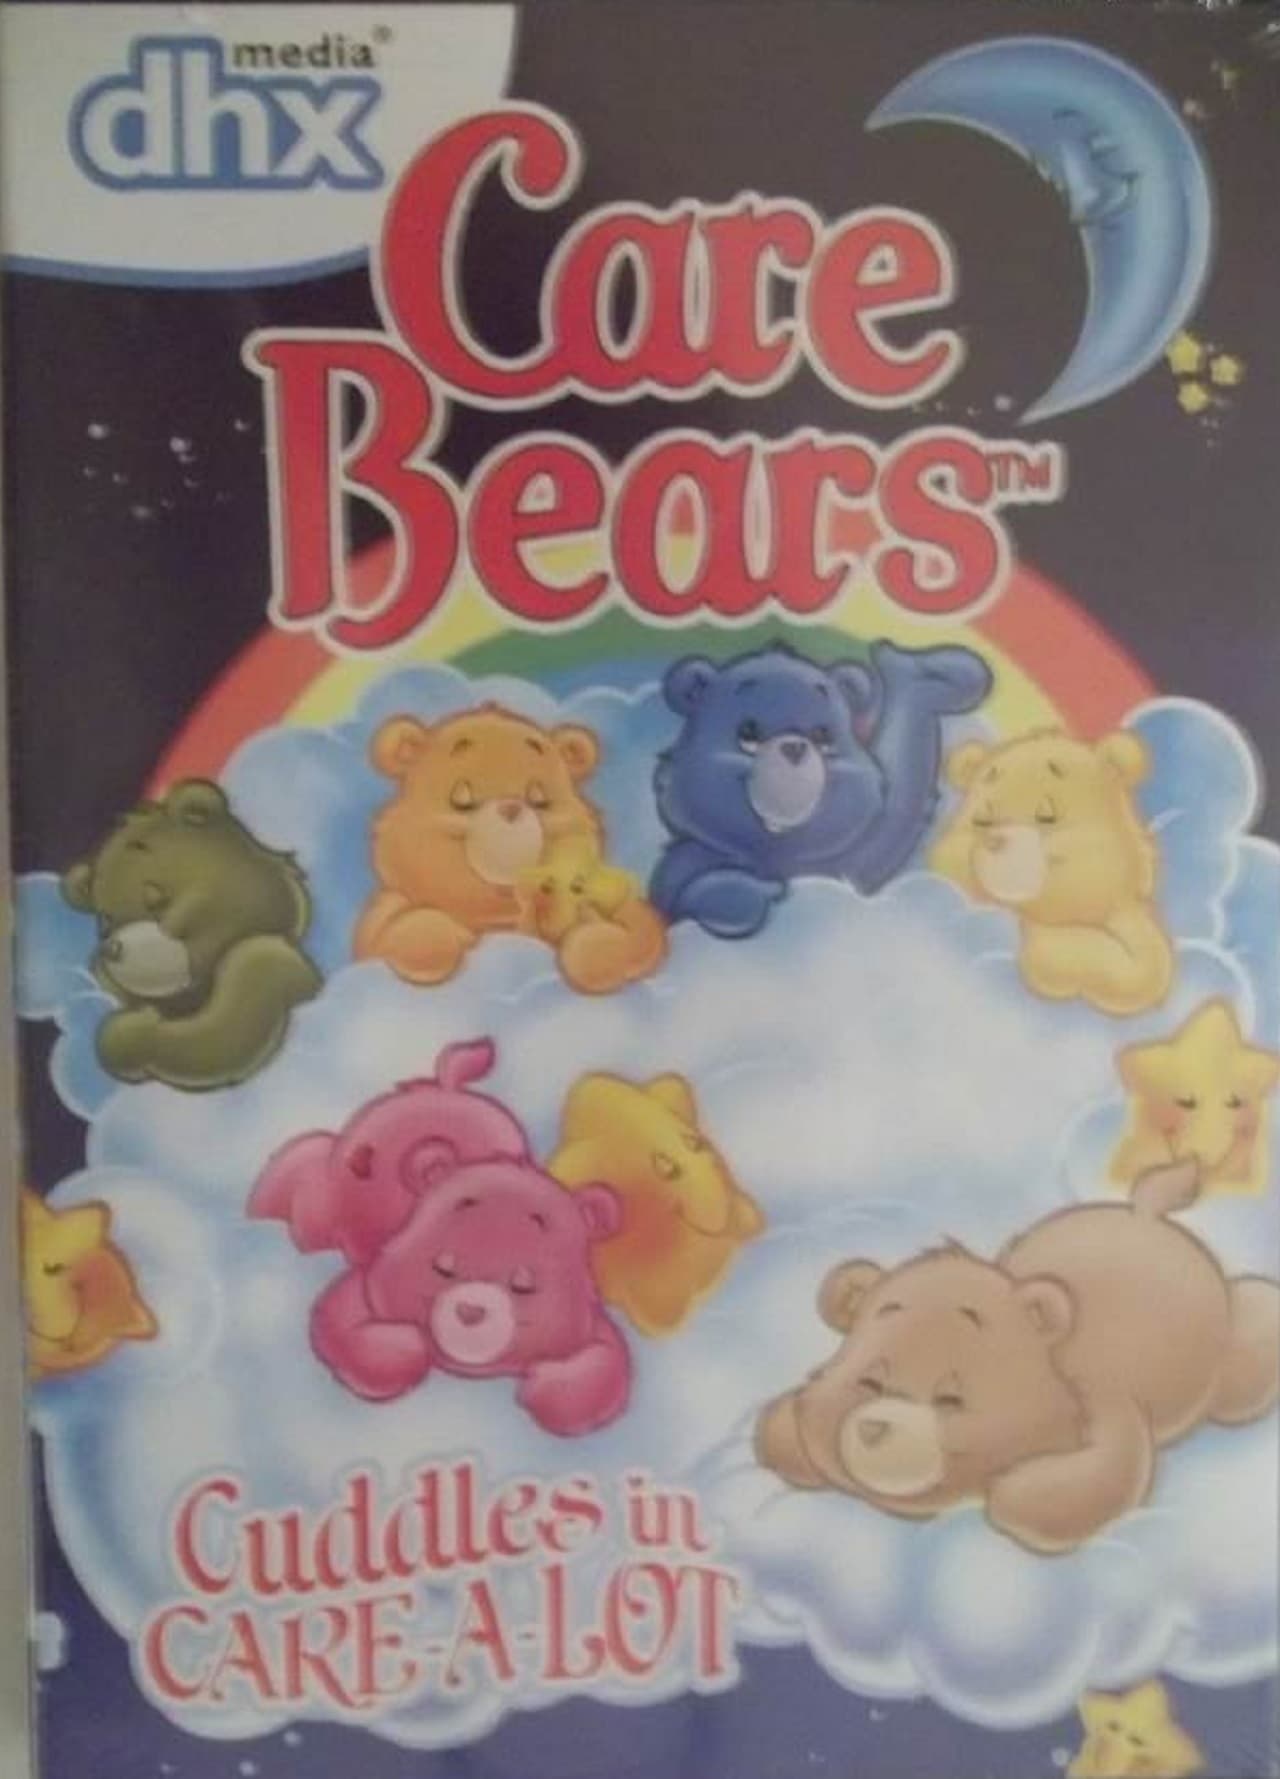 Care Bears: Cuddles in Care-a-lot